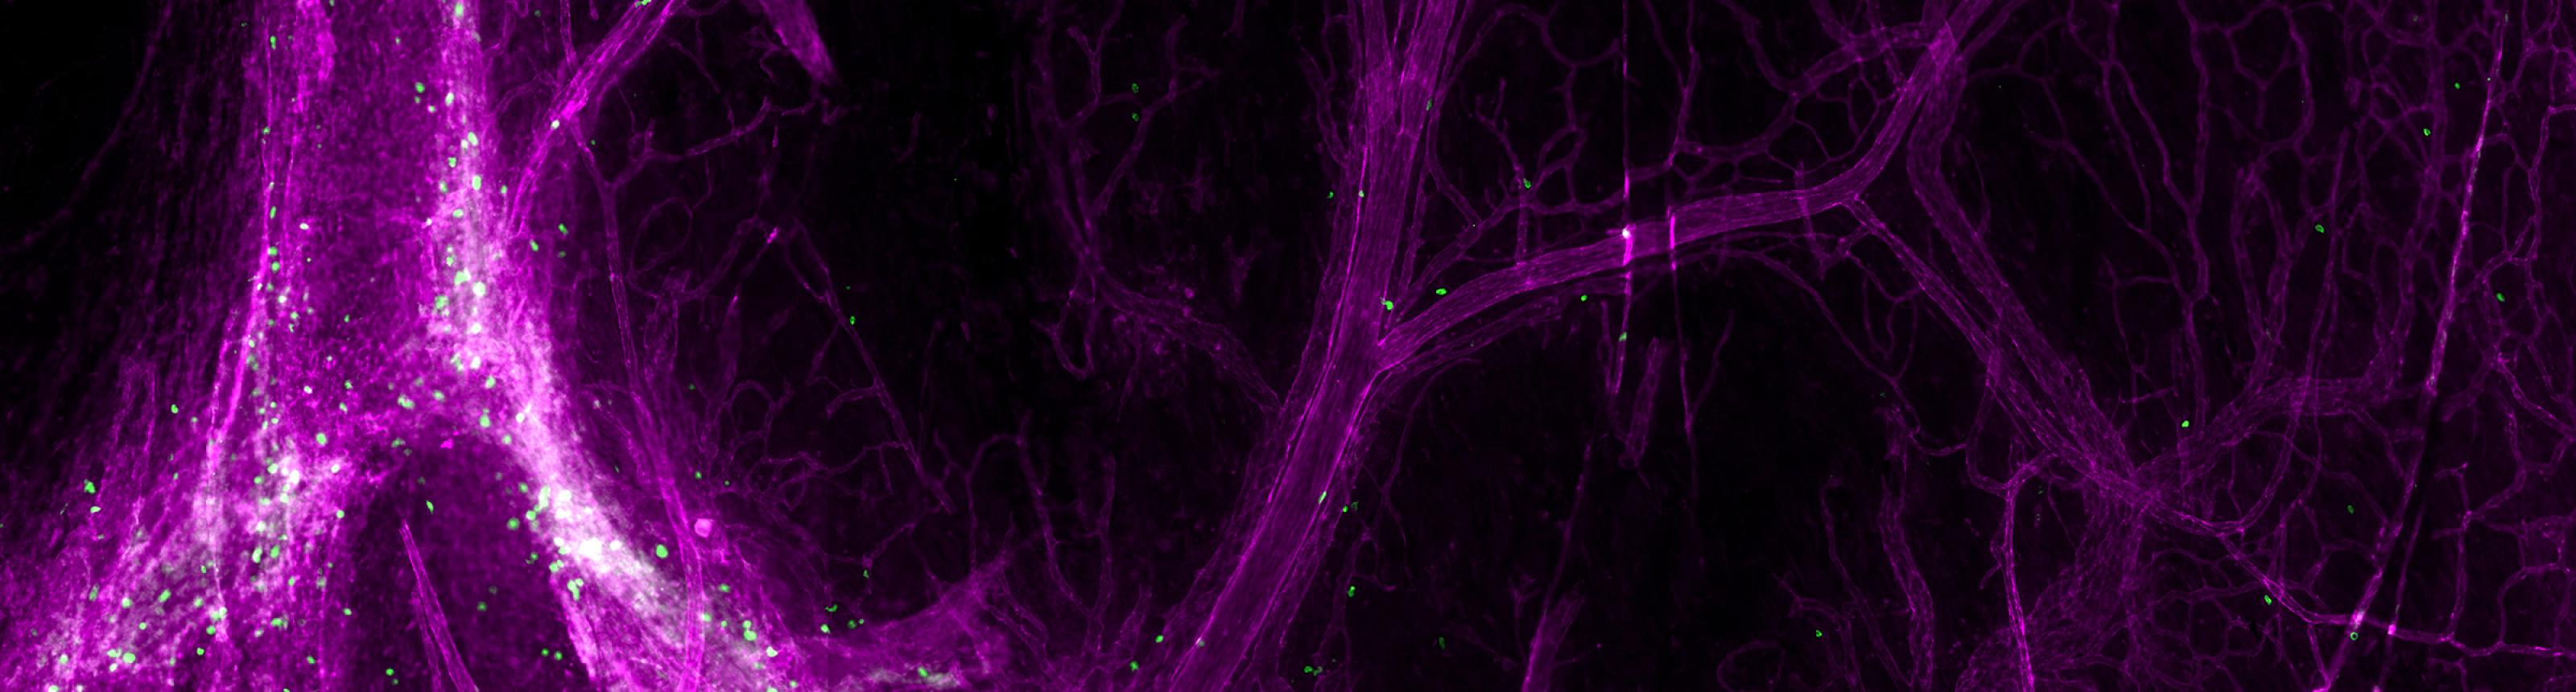 T cells (green) and other leukocytes are found at rest around blood vessels (magenta) within the meningeal membranes surrounding the mouse brain. Photo credit: Jerika Barron.